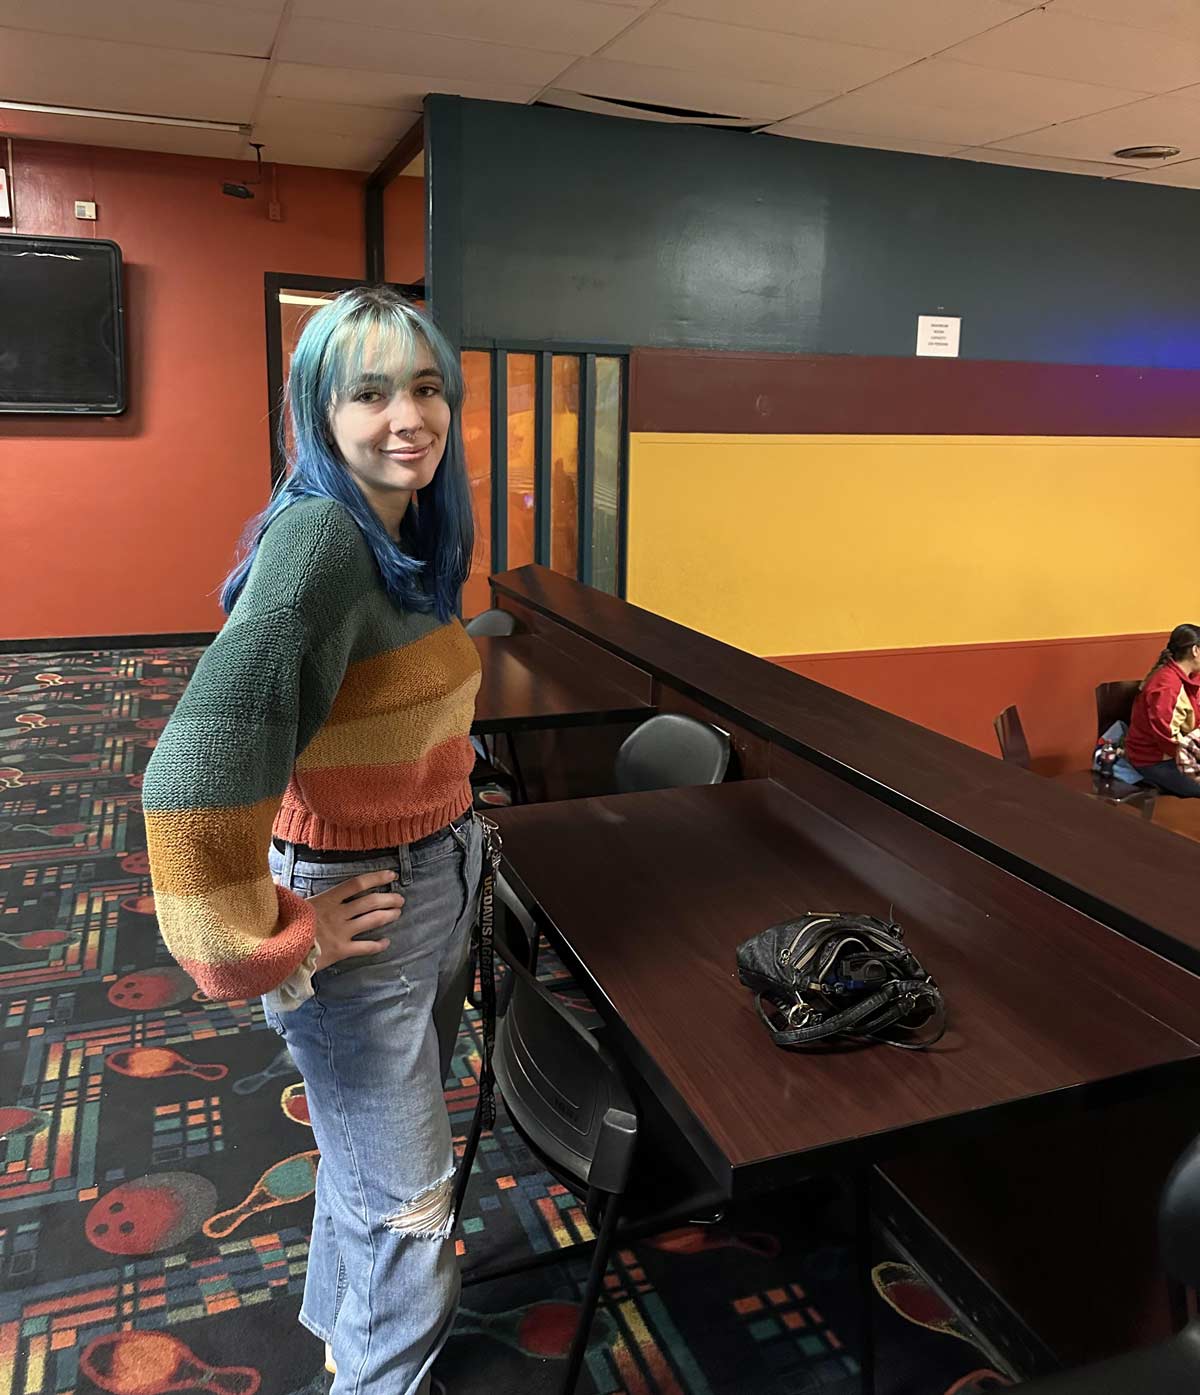 The bowling alley accidentally wore the same outfit as me